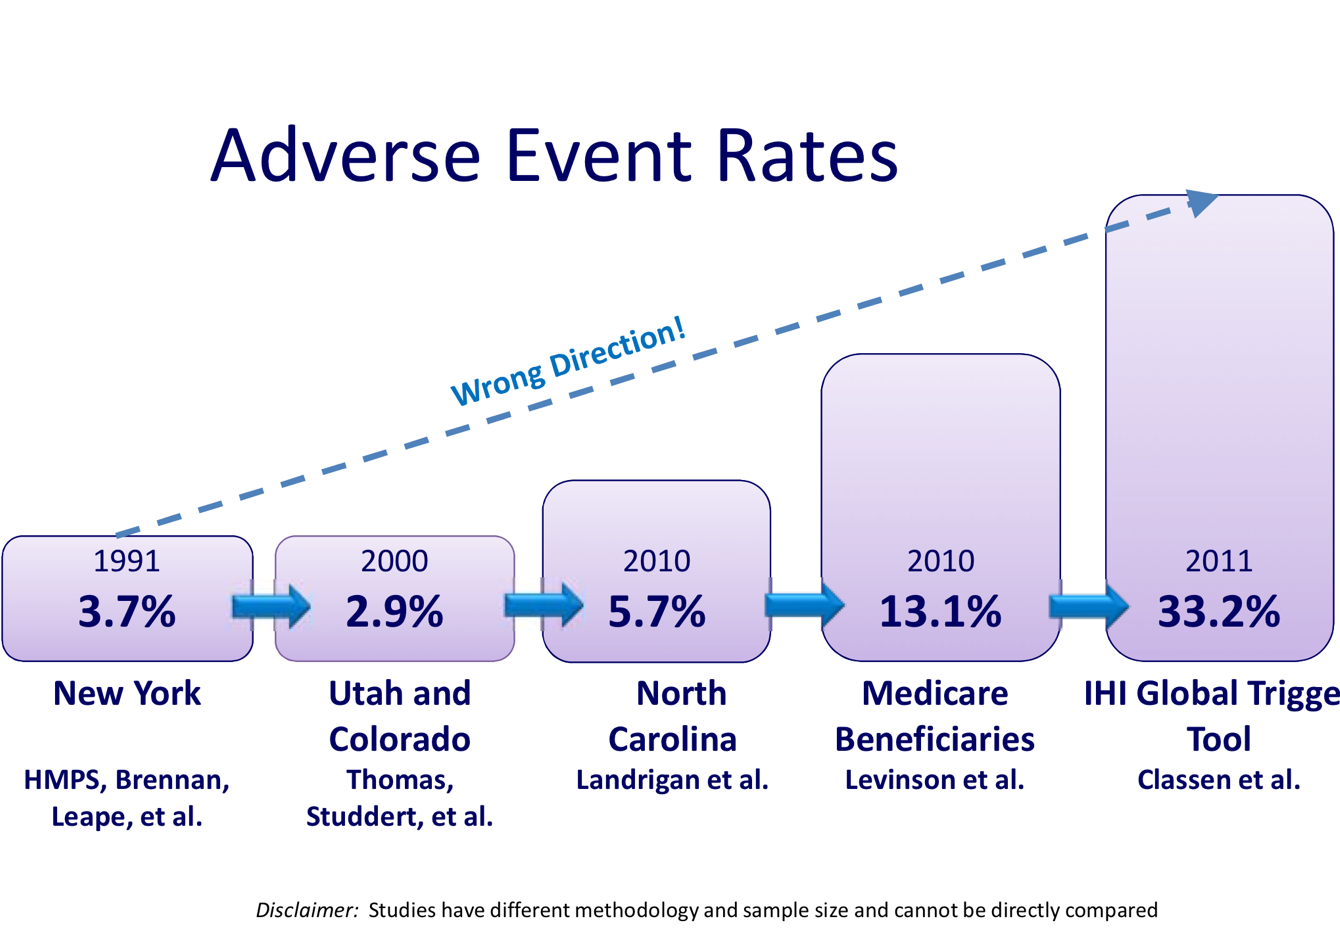 HMPS Business. Crown Trial adverse events.